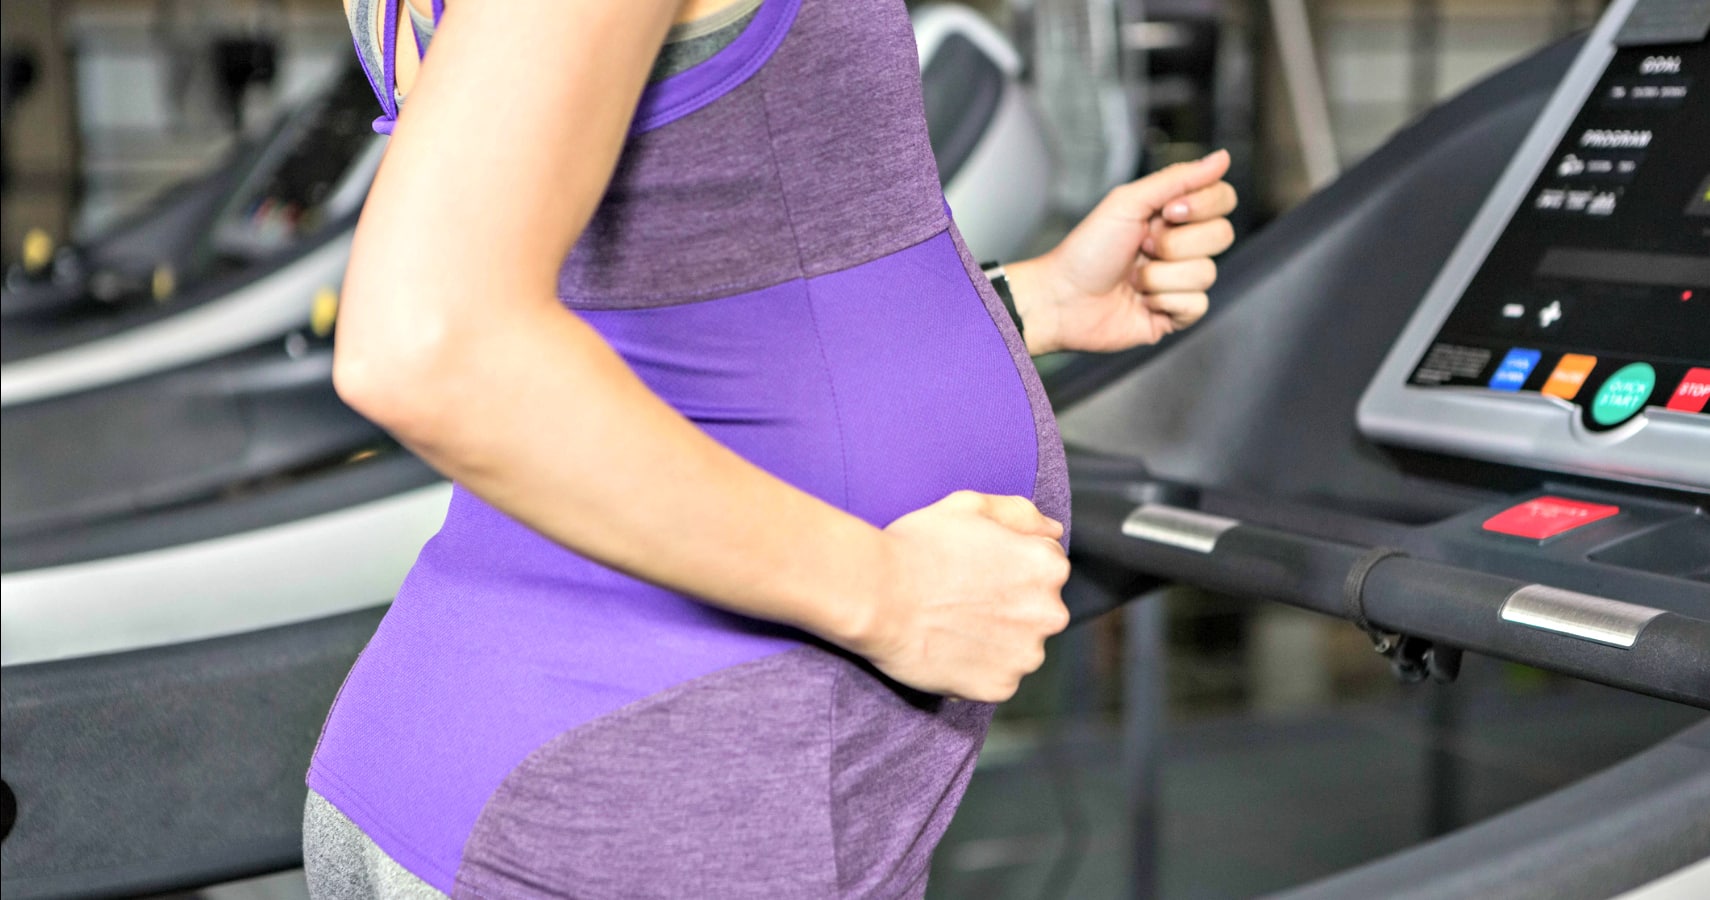 is it safe to exercise during pregnancy?